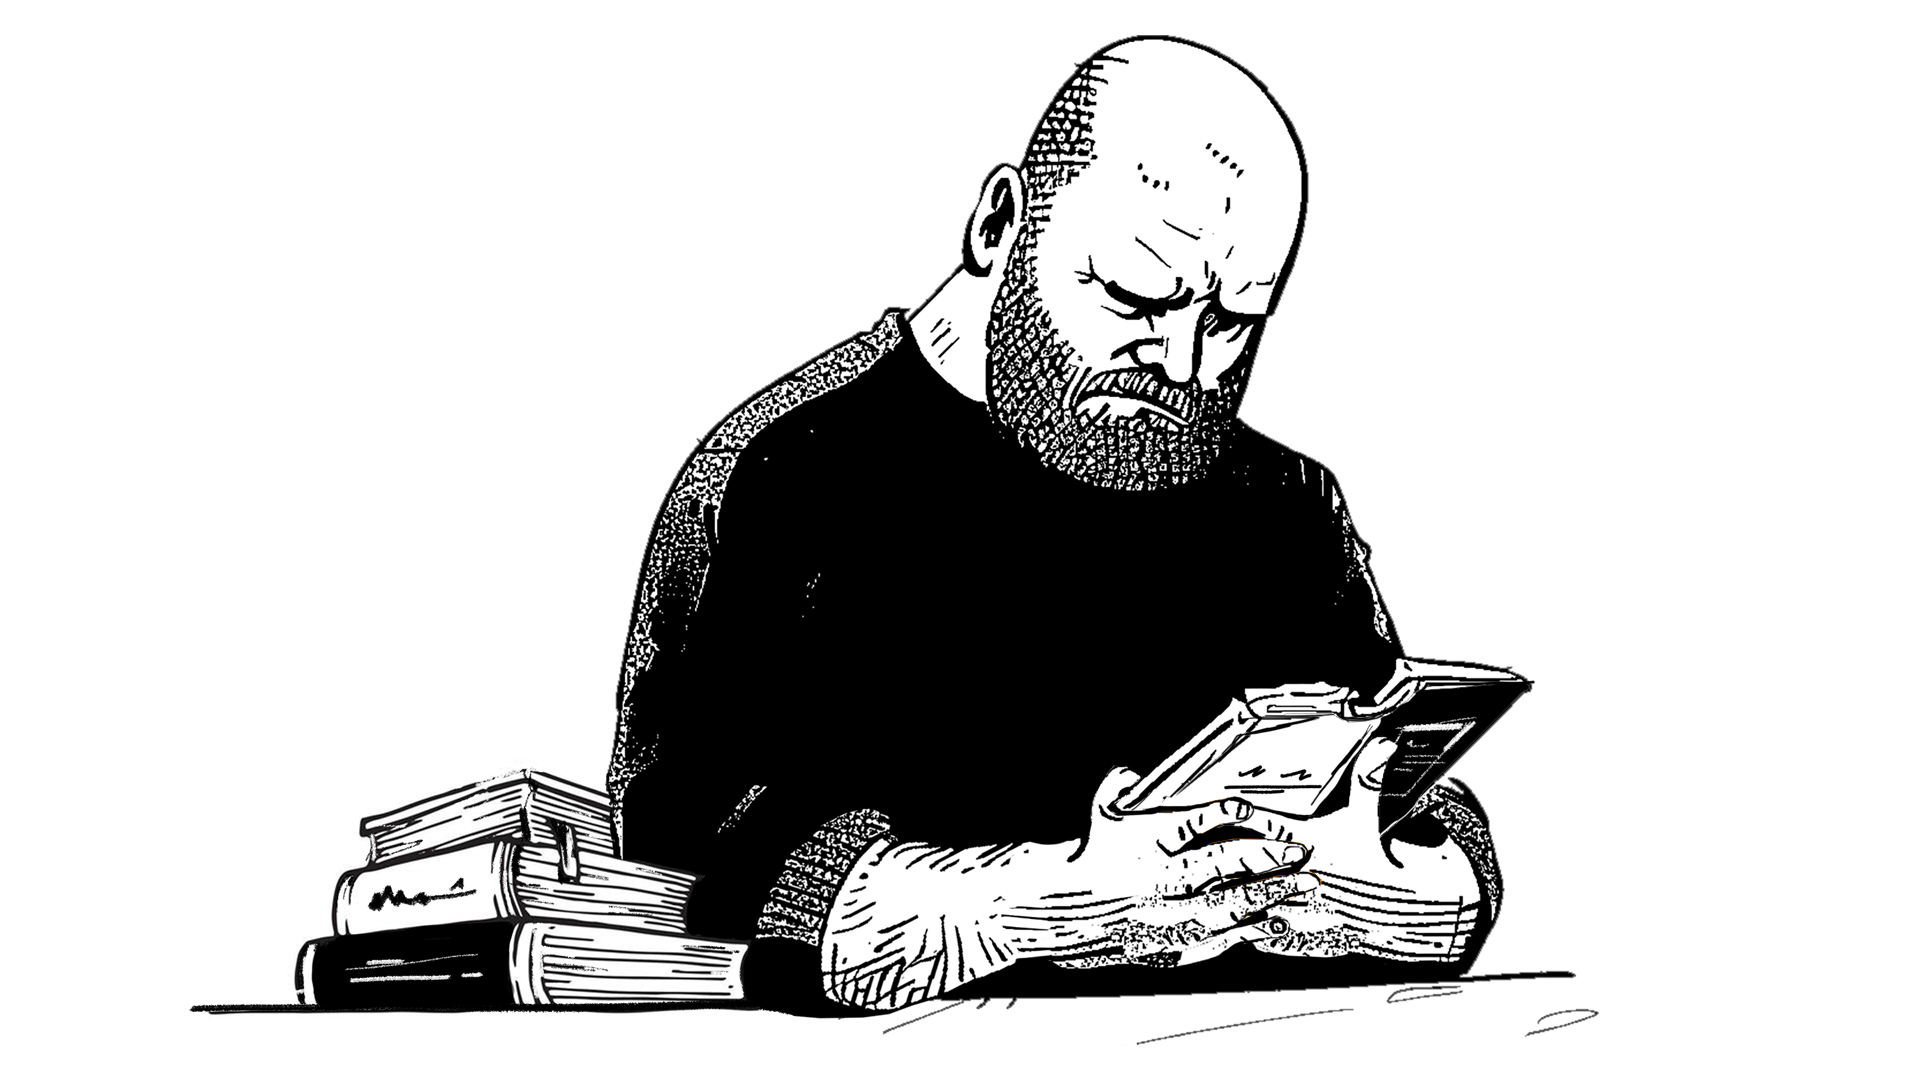 Illustration of Werner reading with a stack of books